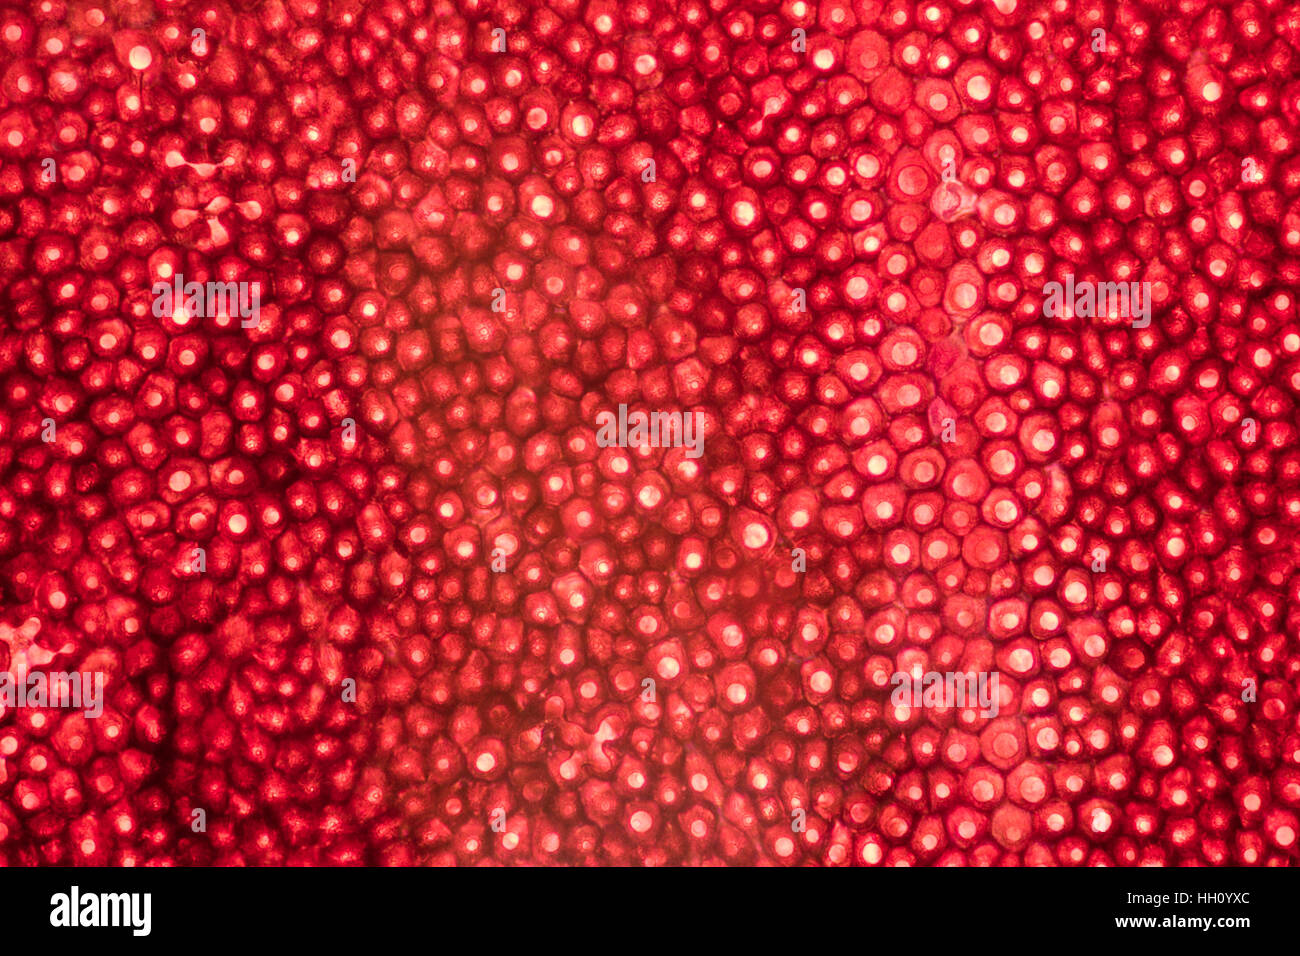 full frame abstract microscopic shot showing the cellular structure of a red rose petal Stock Photo